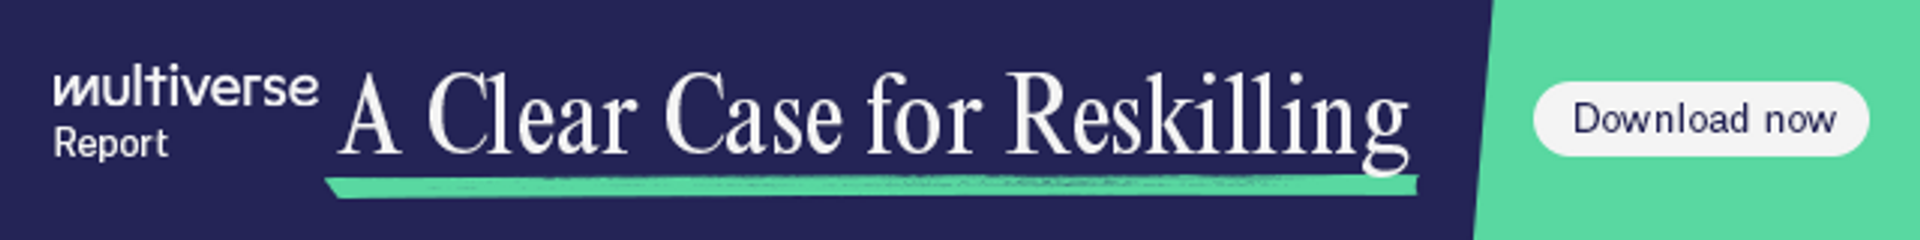 An advertisement banner to drive readers to a whitepaper on reskilling